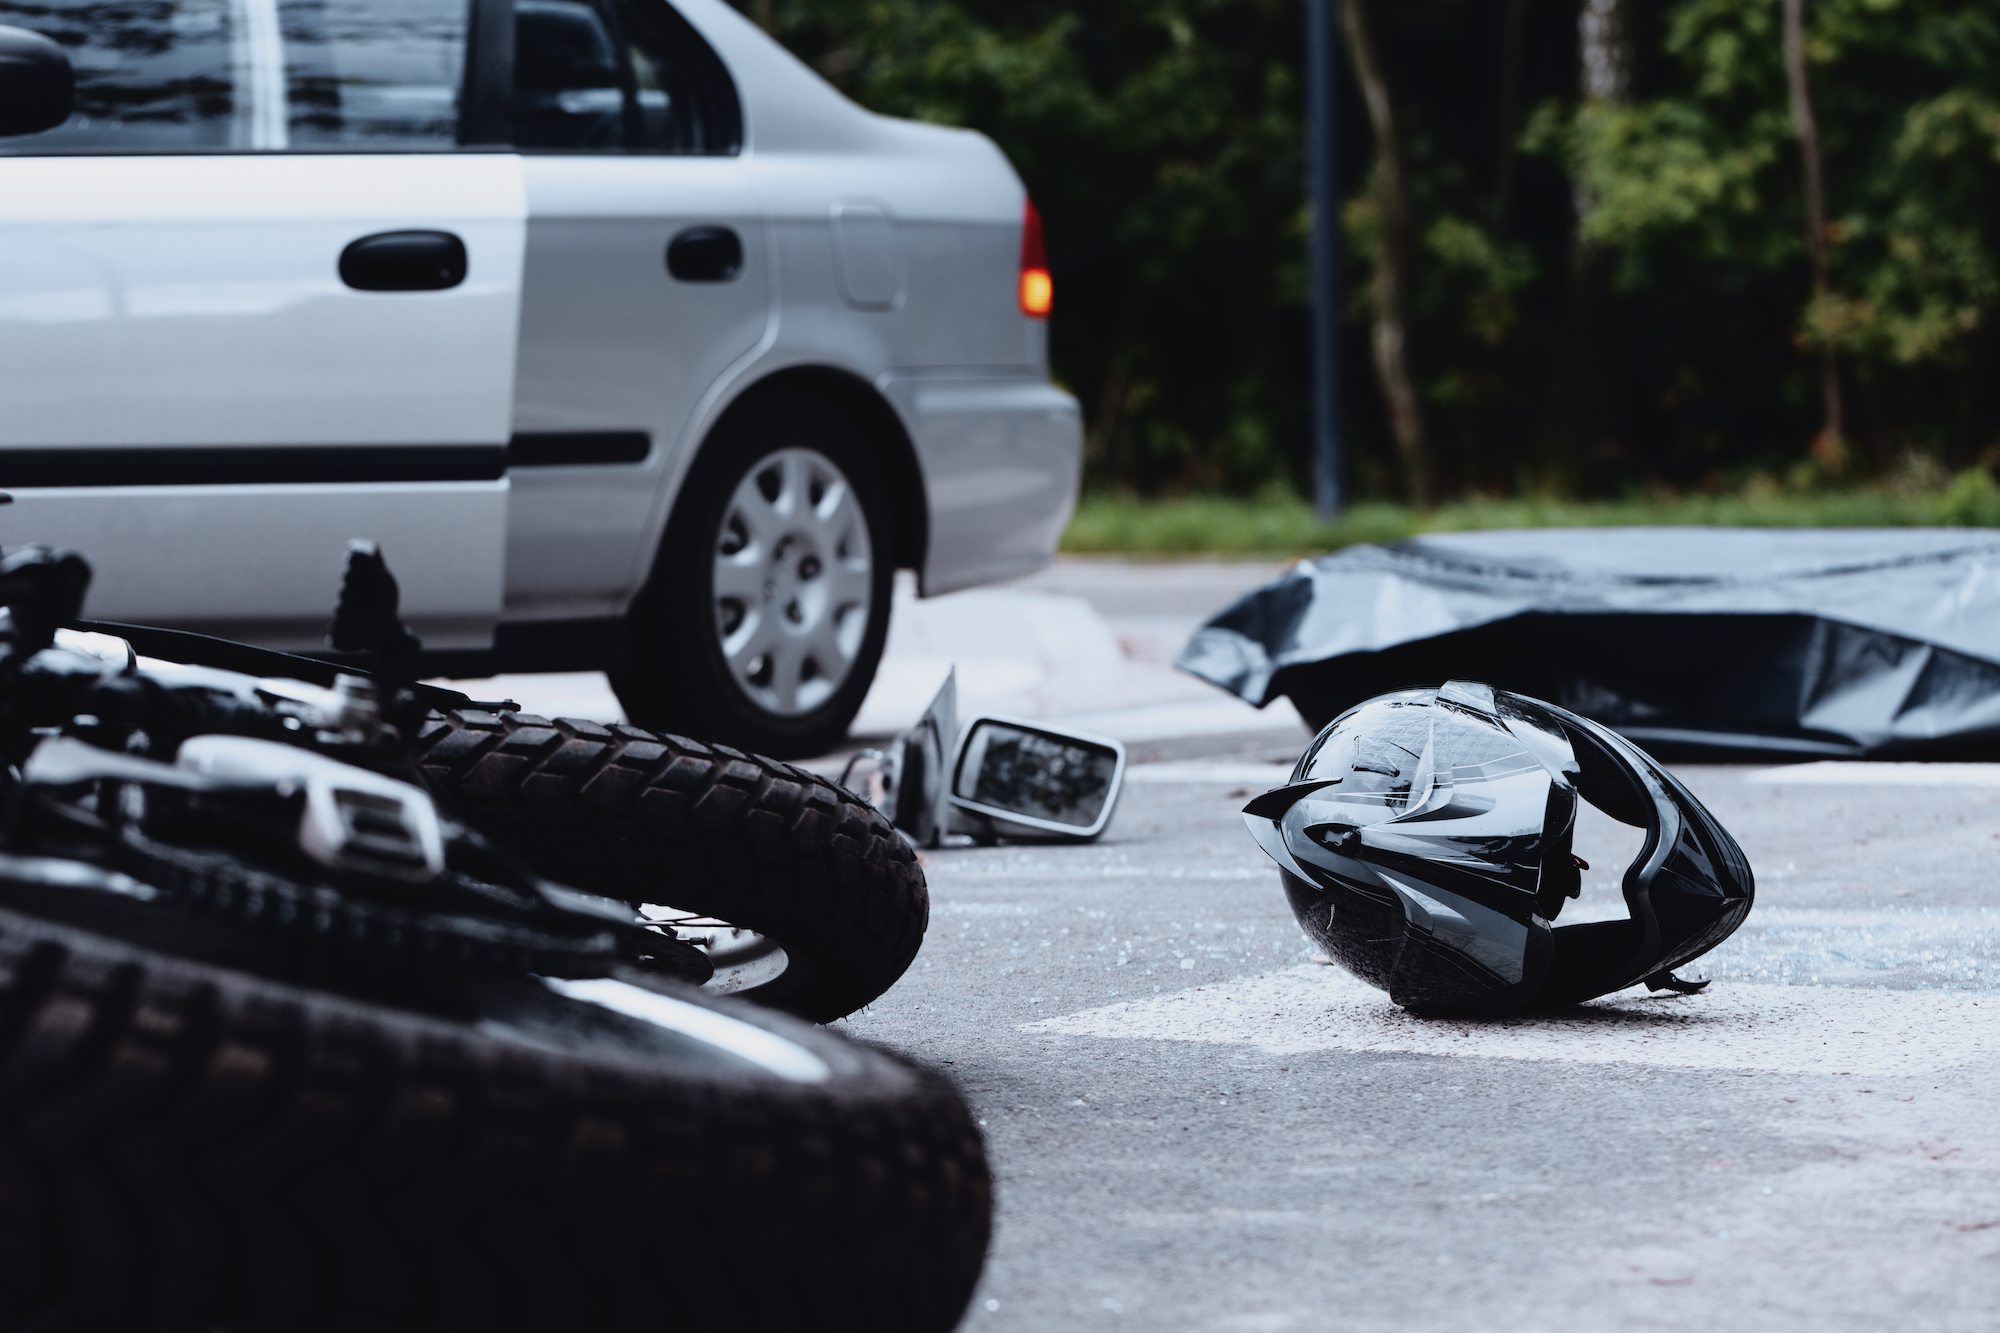 motorcyle and helmet on ground after accident | car accident lawyer